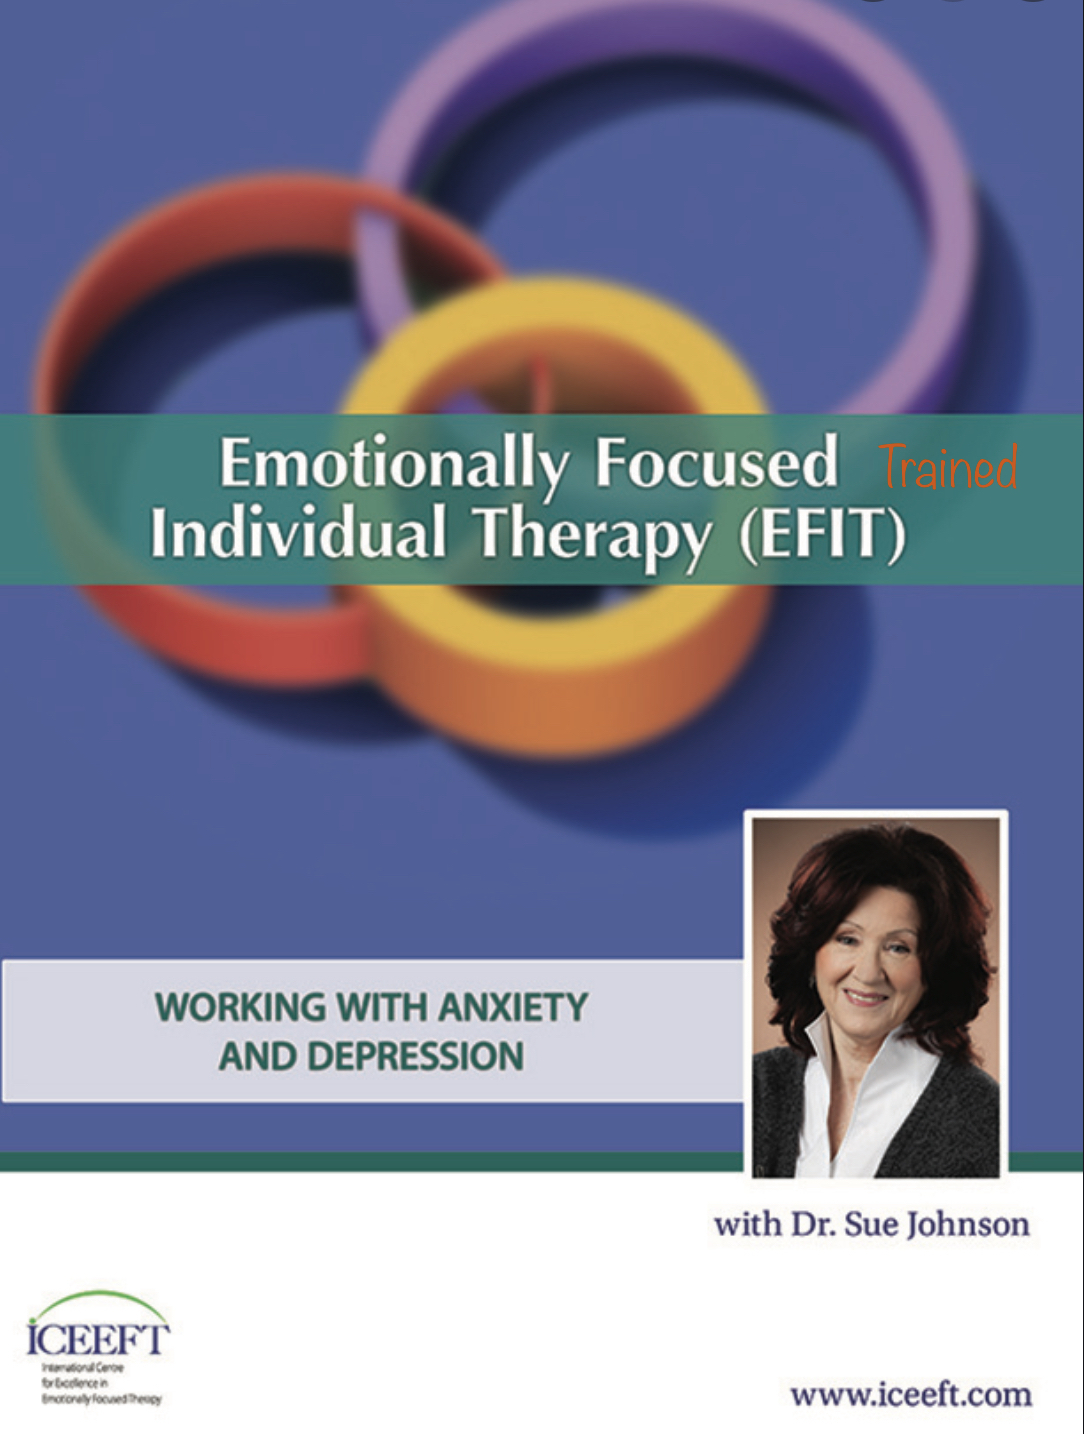 Gallery Photo of Emotion Focused Individual Therapy working with anxiety and depression focused on a corrective experience through prioritizing emotions and regulation